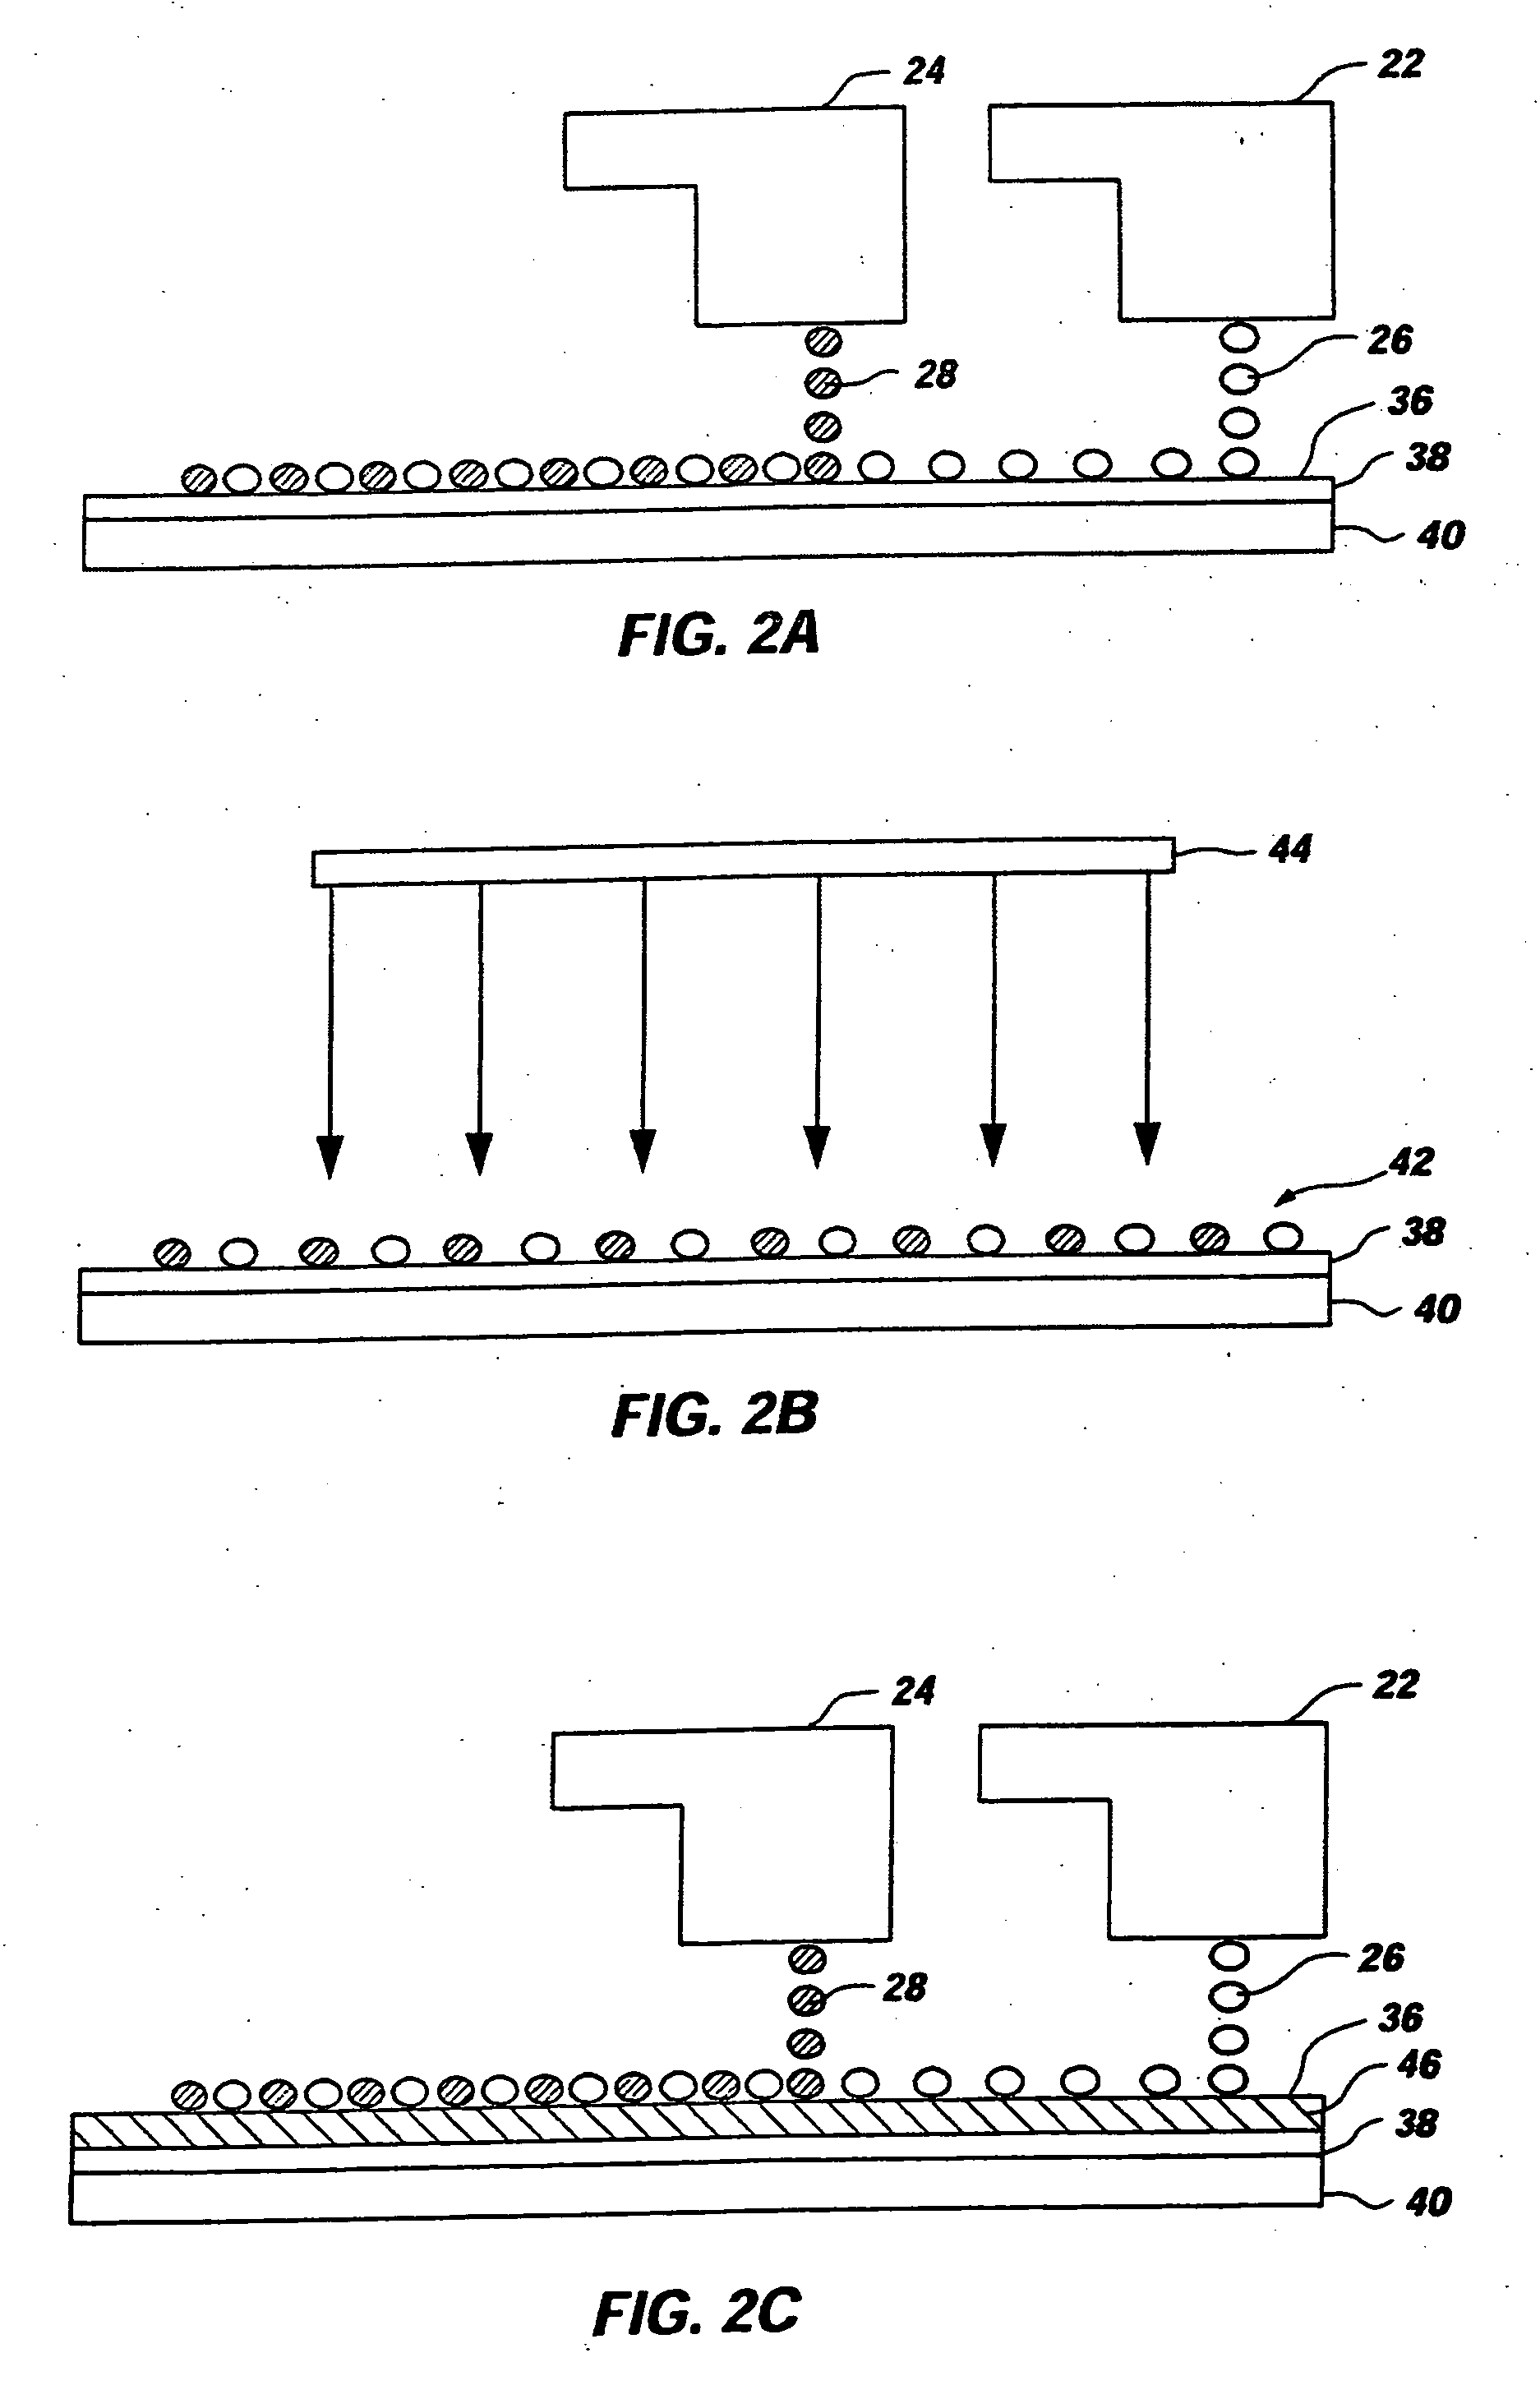 Reactive materials systems and methods for solid freeform fabrication of three-dimensional objects